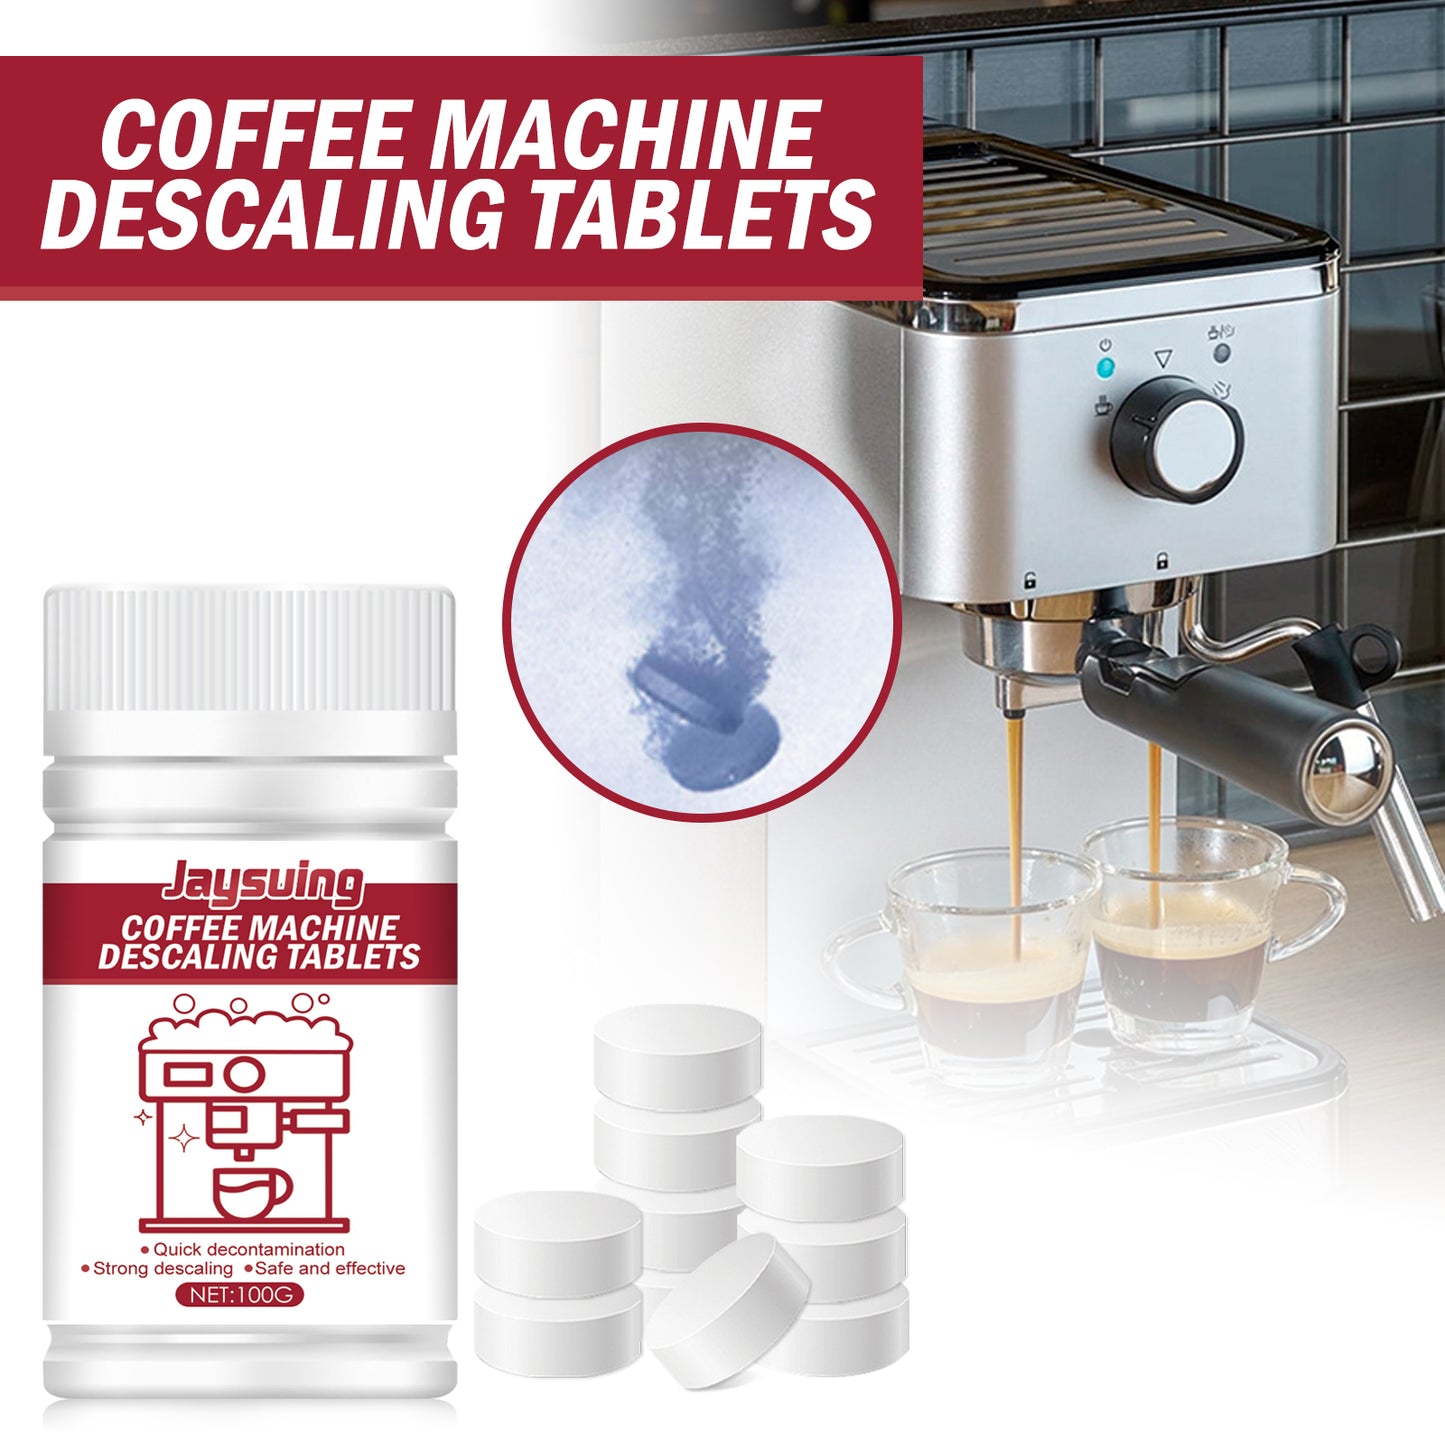 Coffee Cleaning Tablets